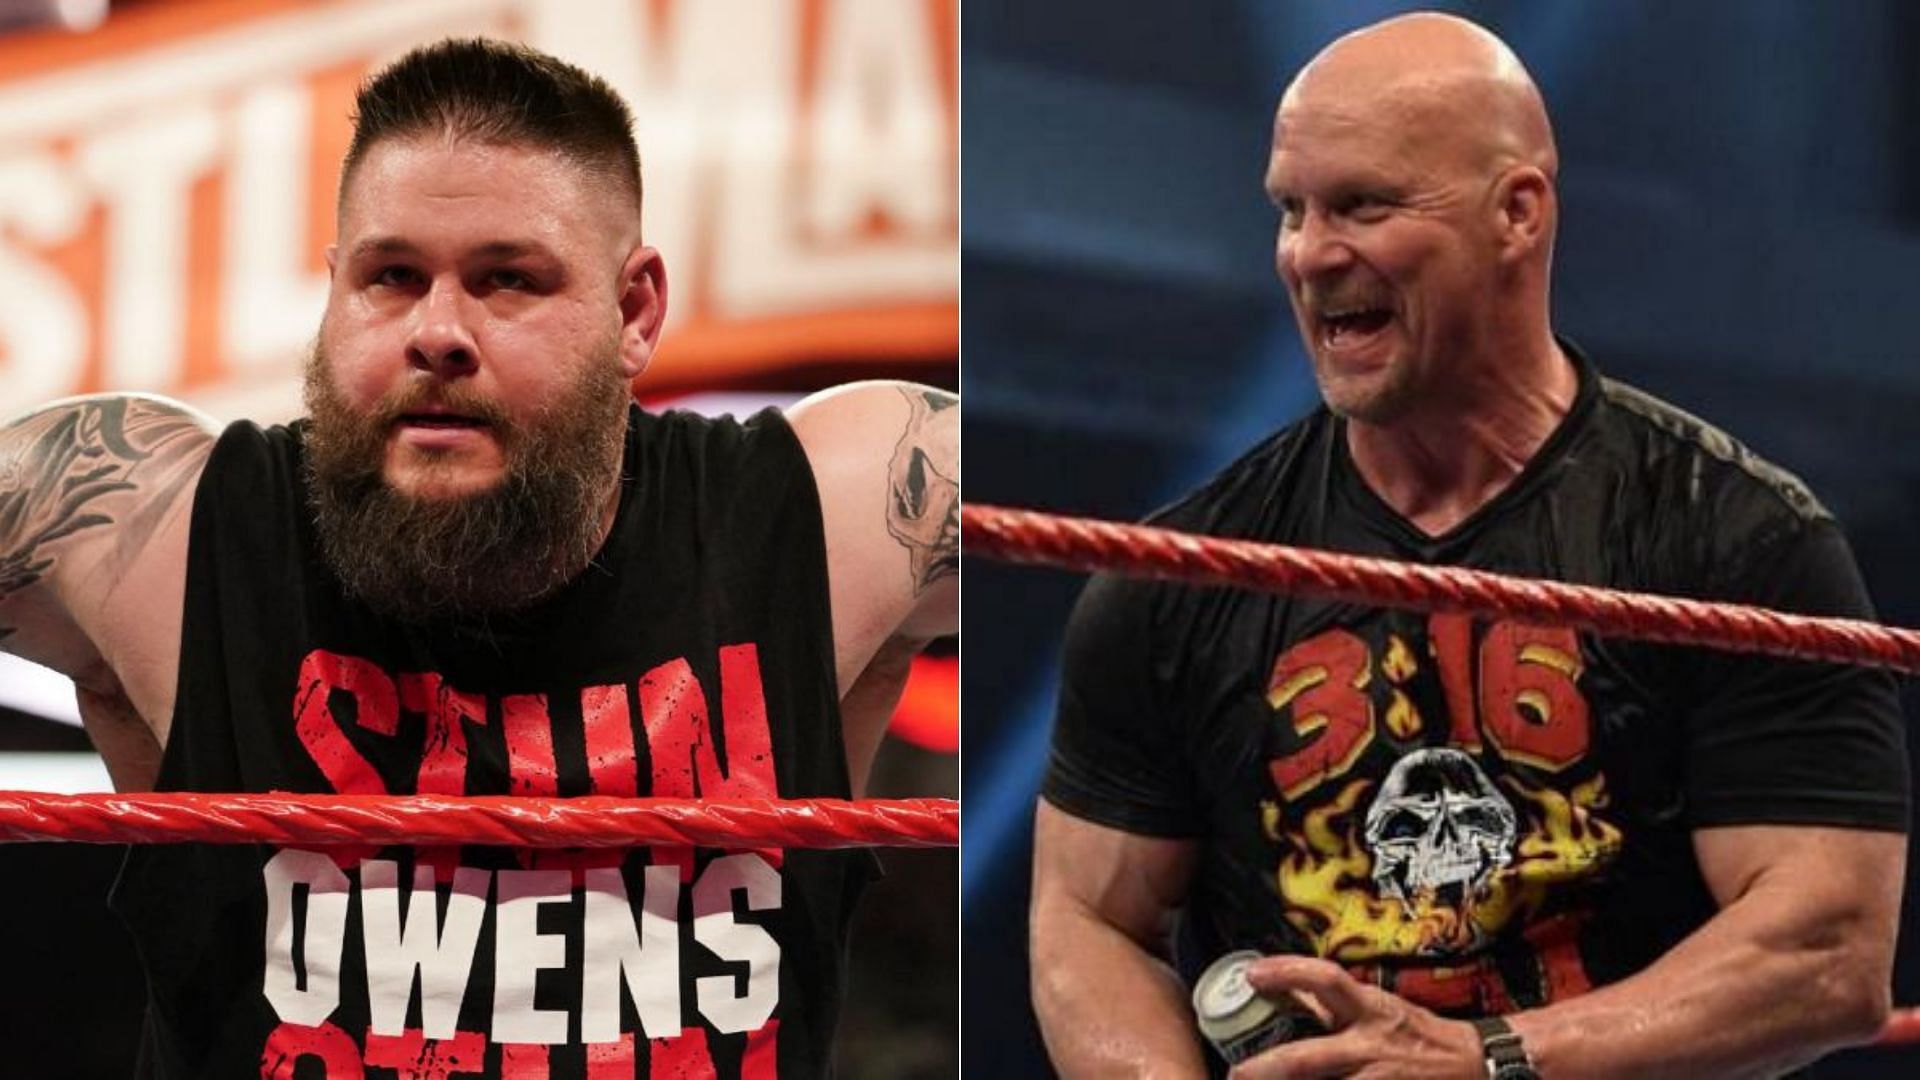 Kevin Owens has riled up many legends in recent weeks